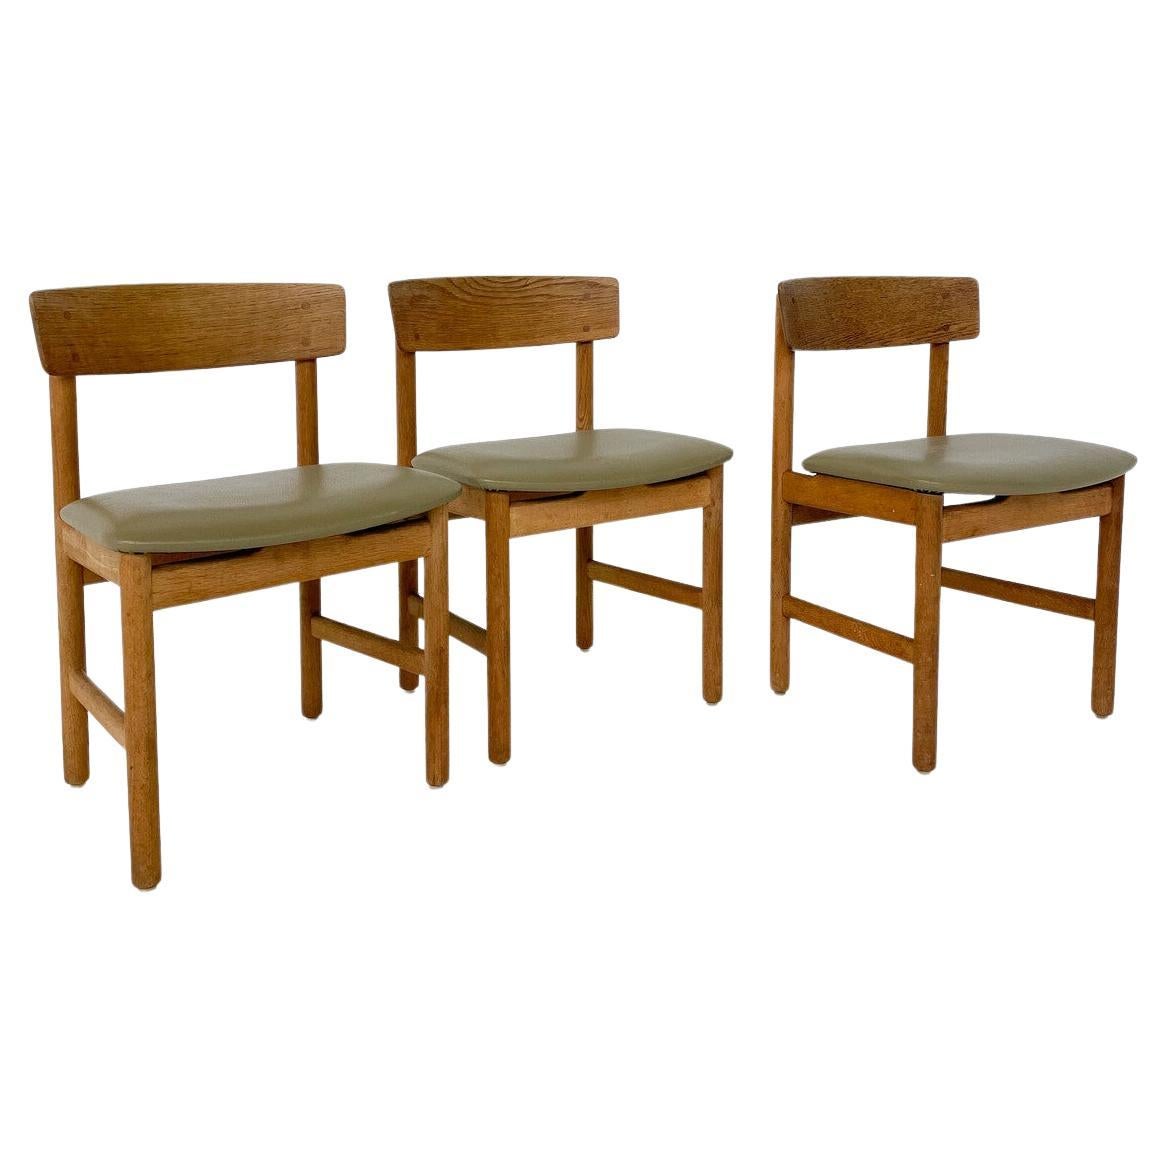 Set of 3 Dining Chairs Model 236 by Børge Mogensen, Denmark, 1950s For Sale